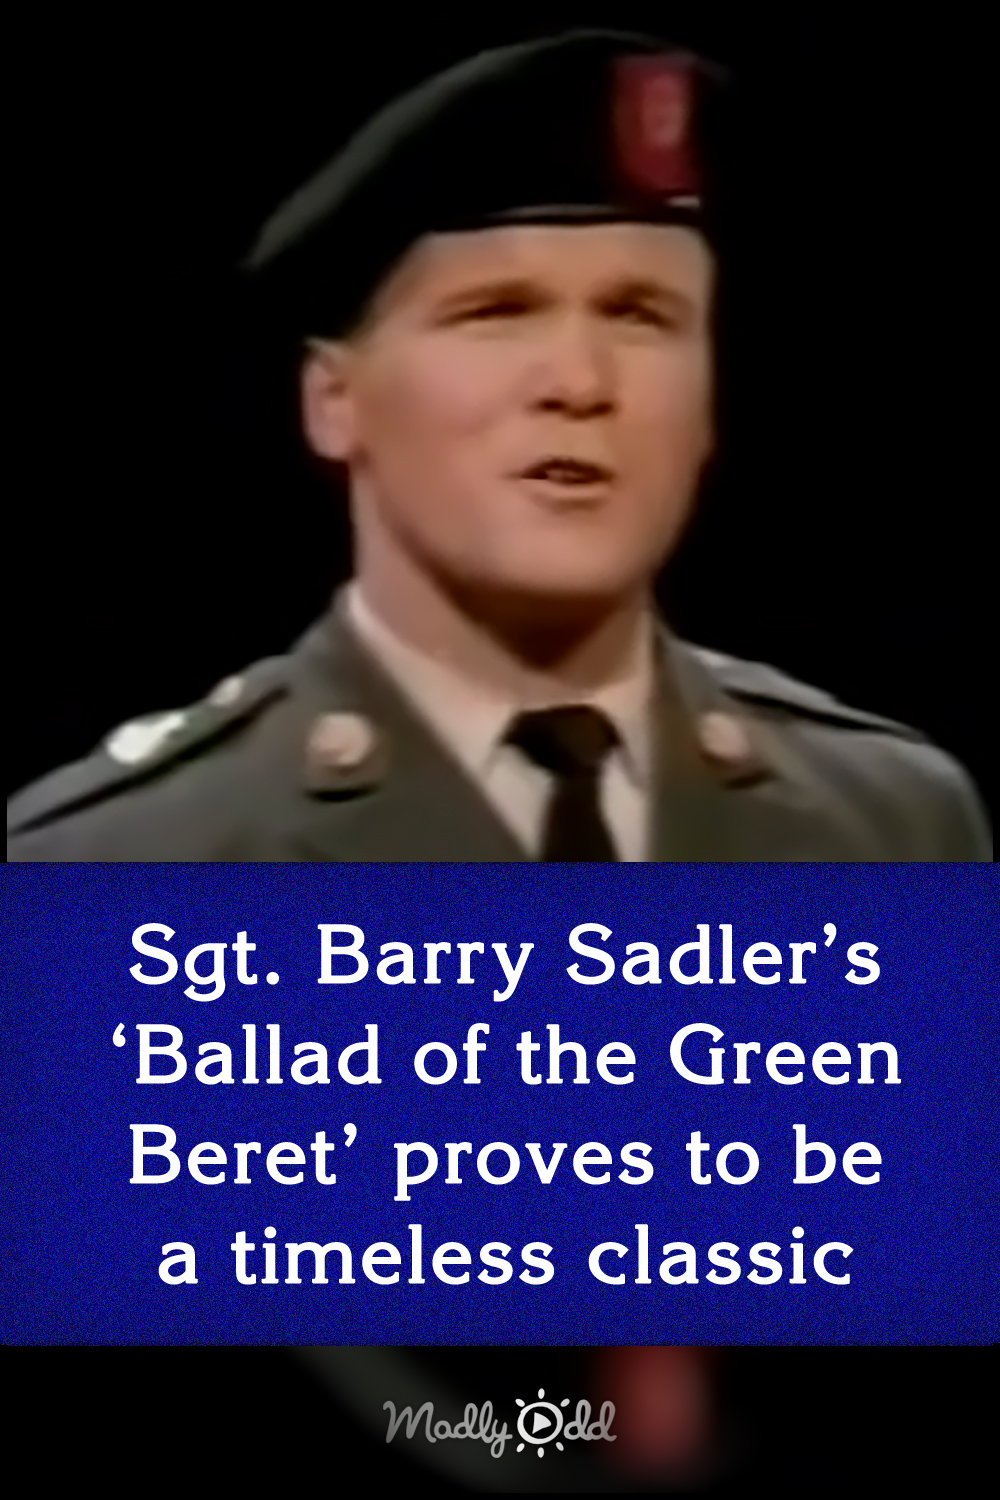 Sgt. Barry Sadler’s ‘Ballad of the Green Beret’ proves to be a timeless classic